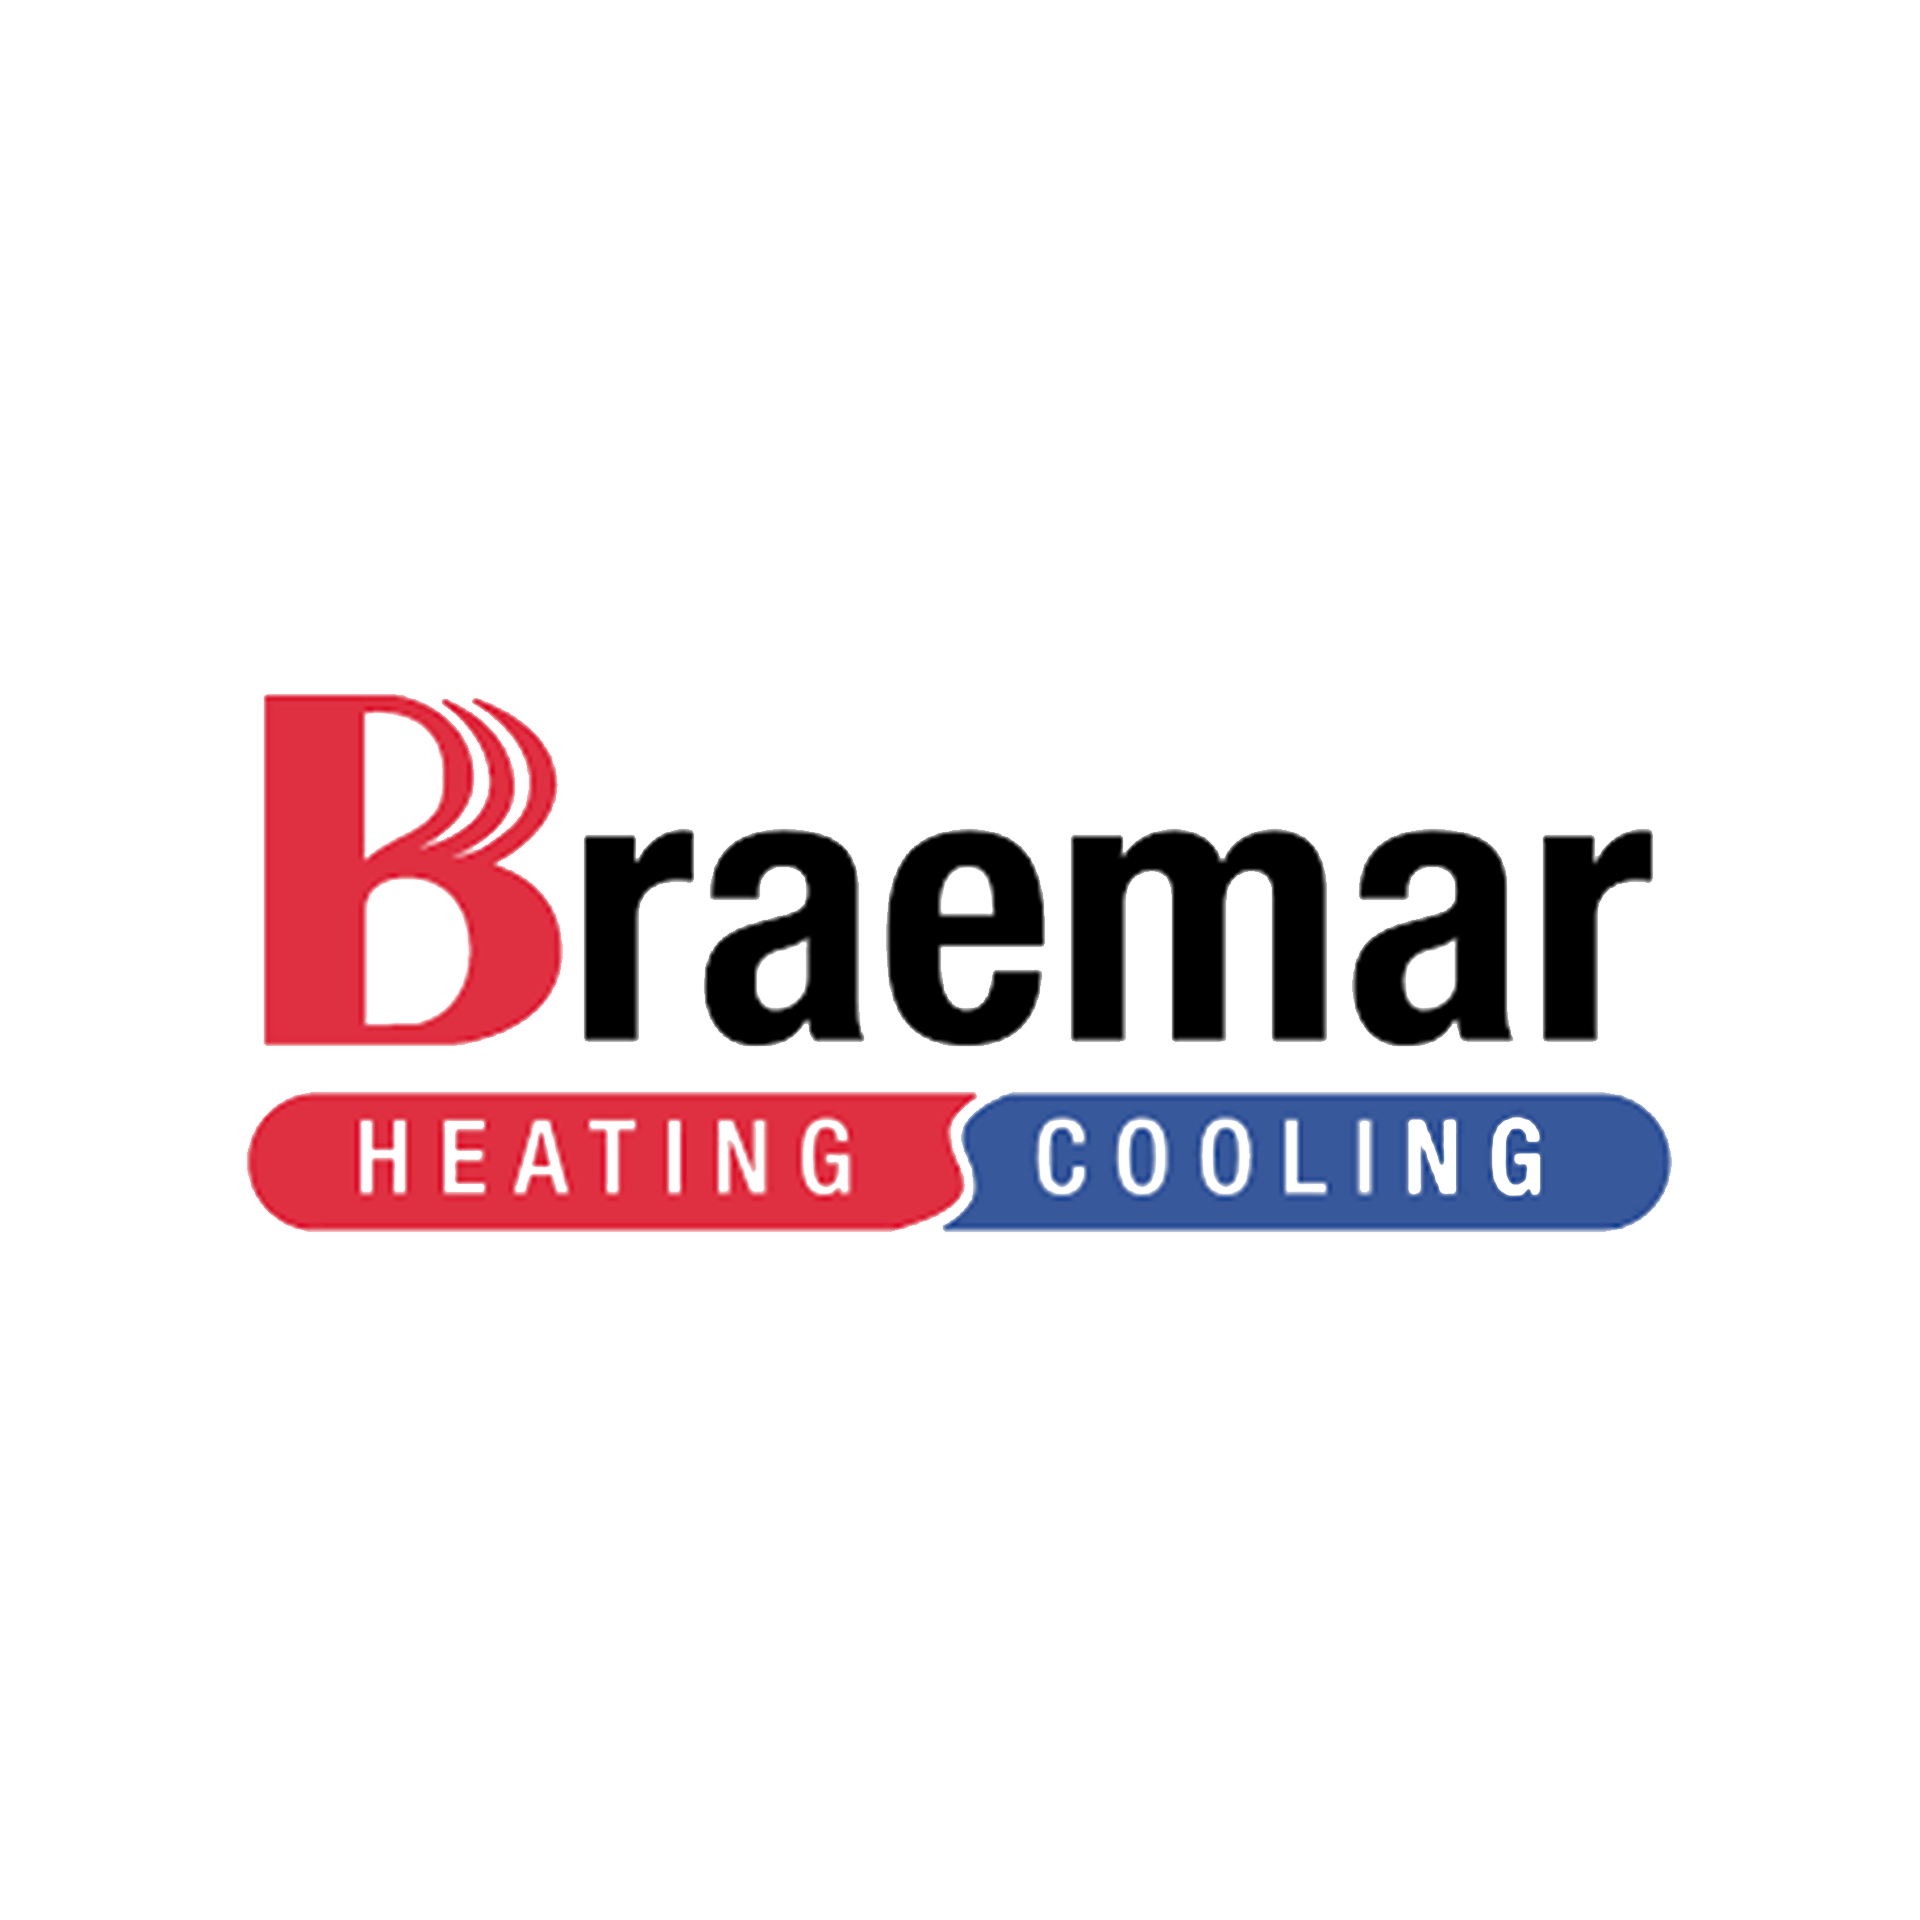 Braemar heating and cooling logo on white background